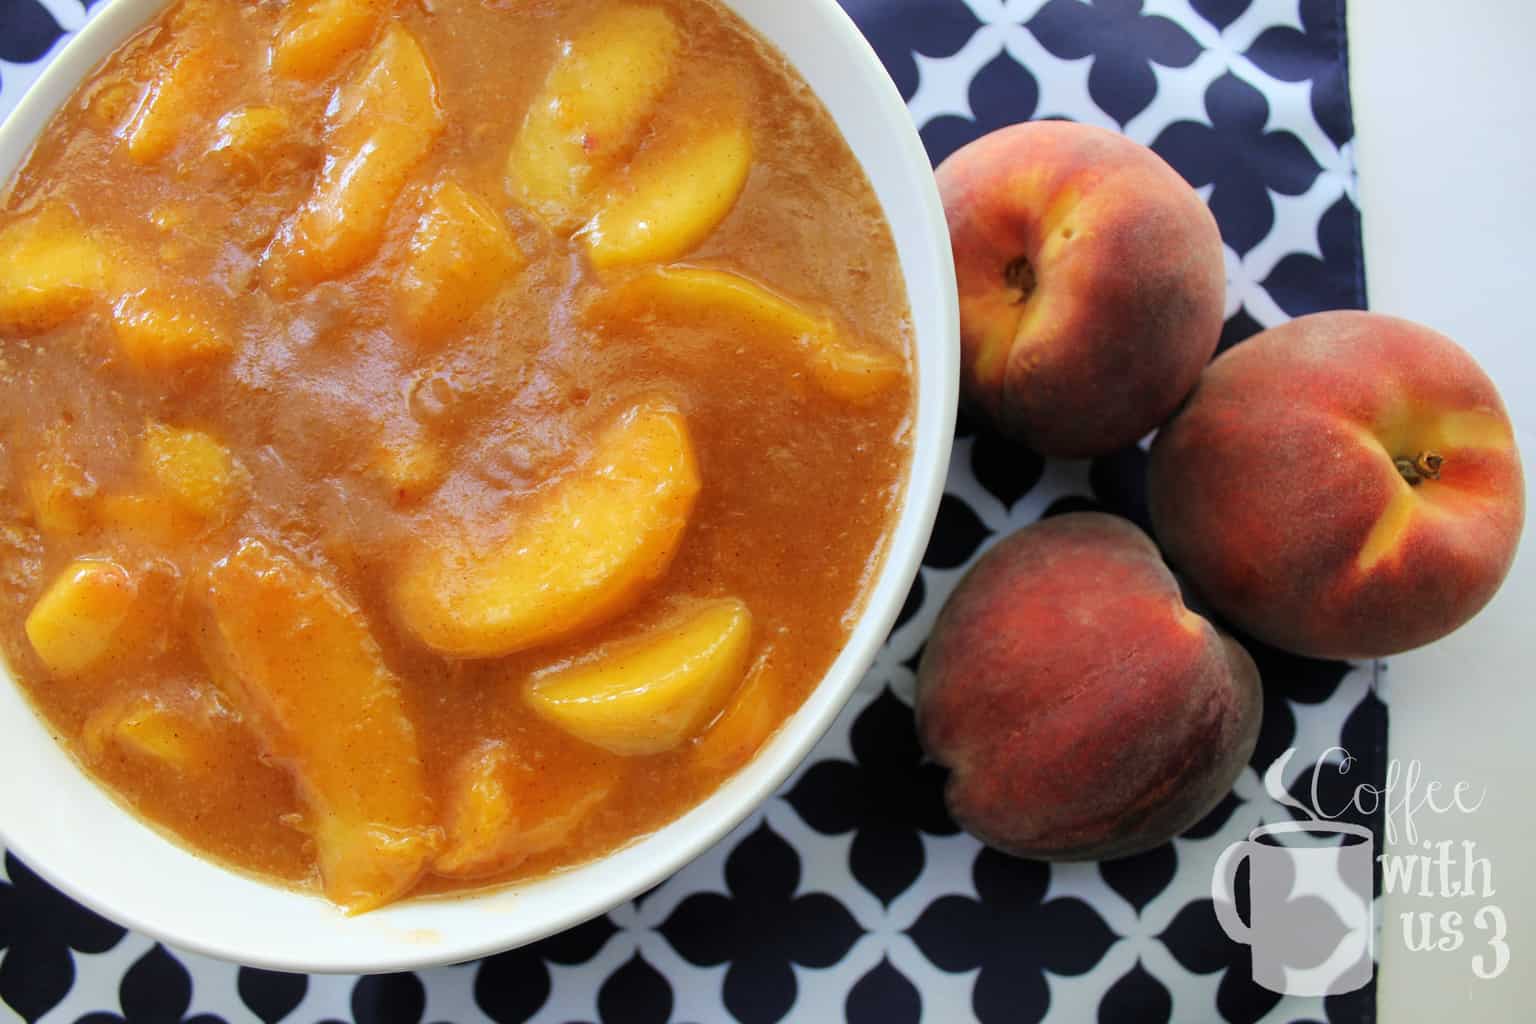 Preserve your delicious peaches to use all winter long with this freezable Peach Pie Filling recipe.